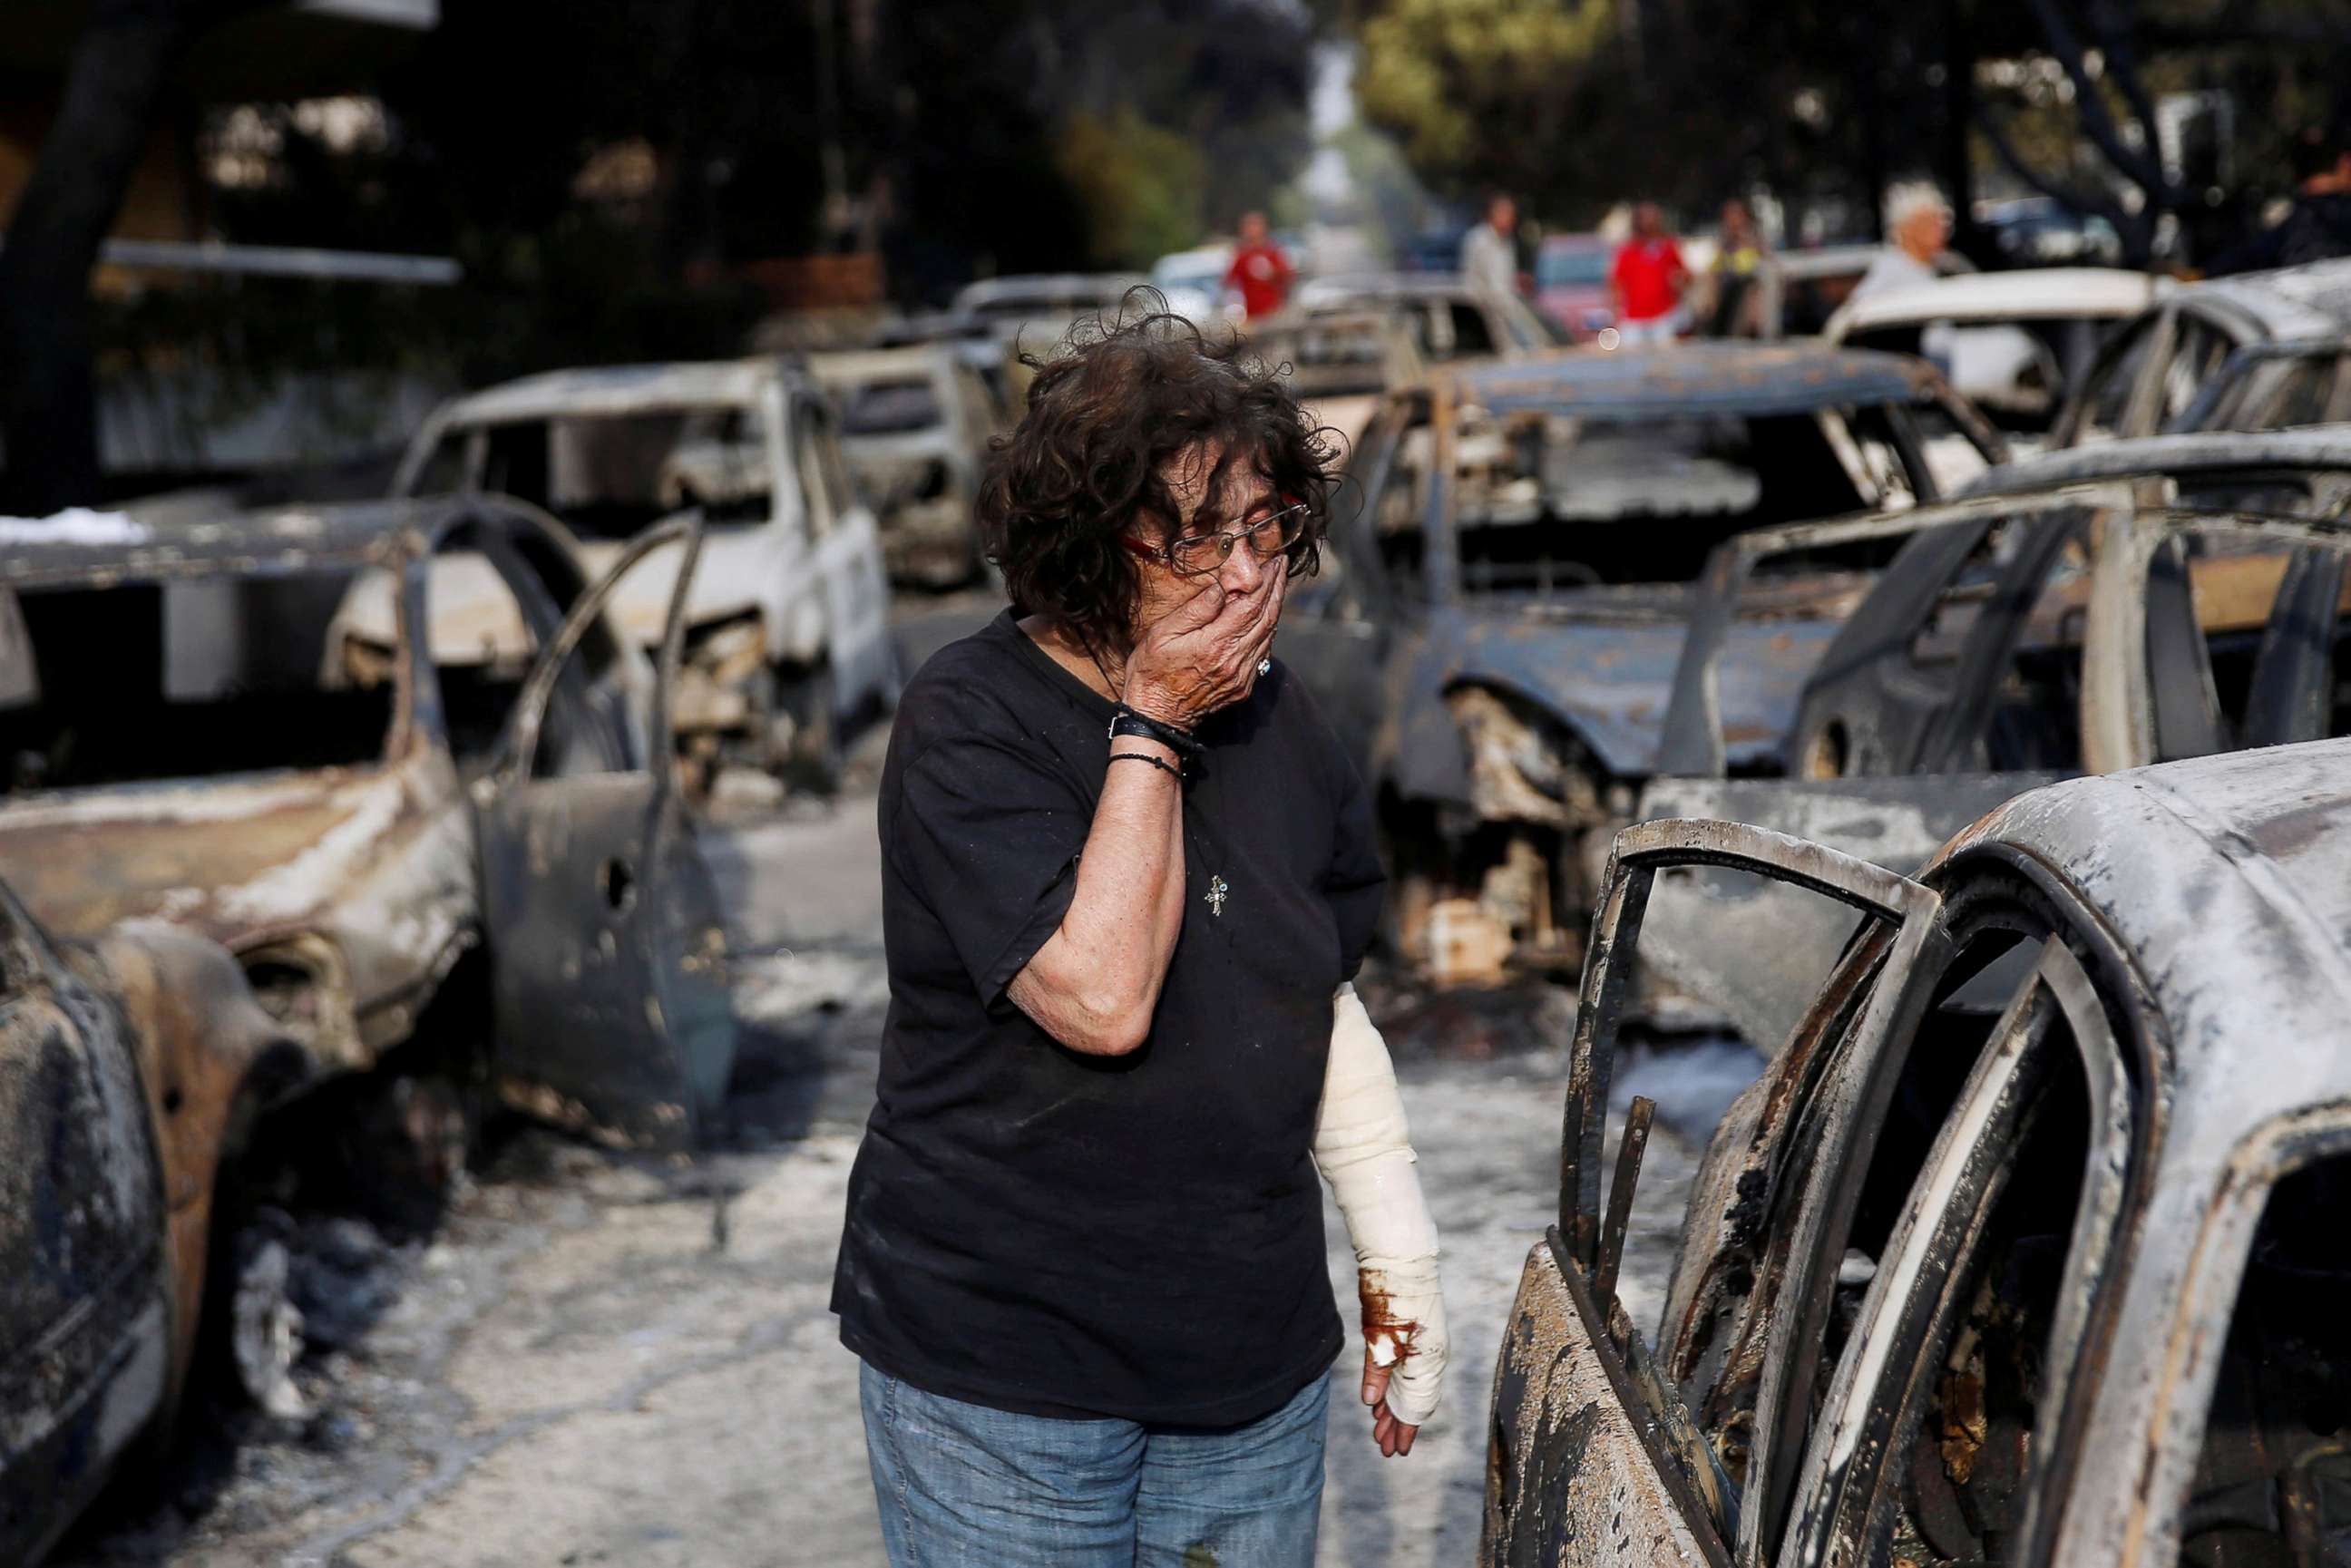 PHOTO: A woman reacts as she tries to find her dog, following a wildfire at the village of Mati, near Athens, Greece, July 24, 2018.